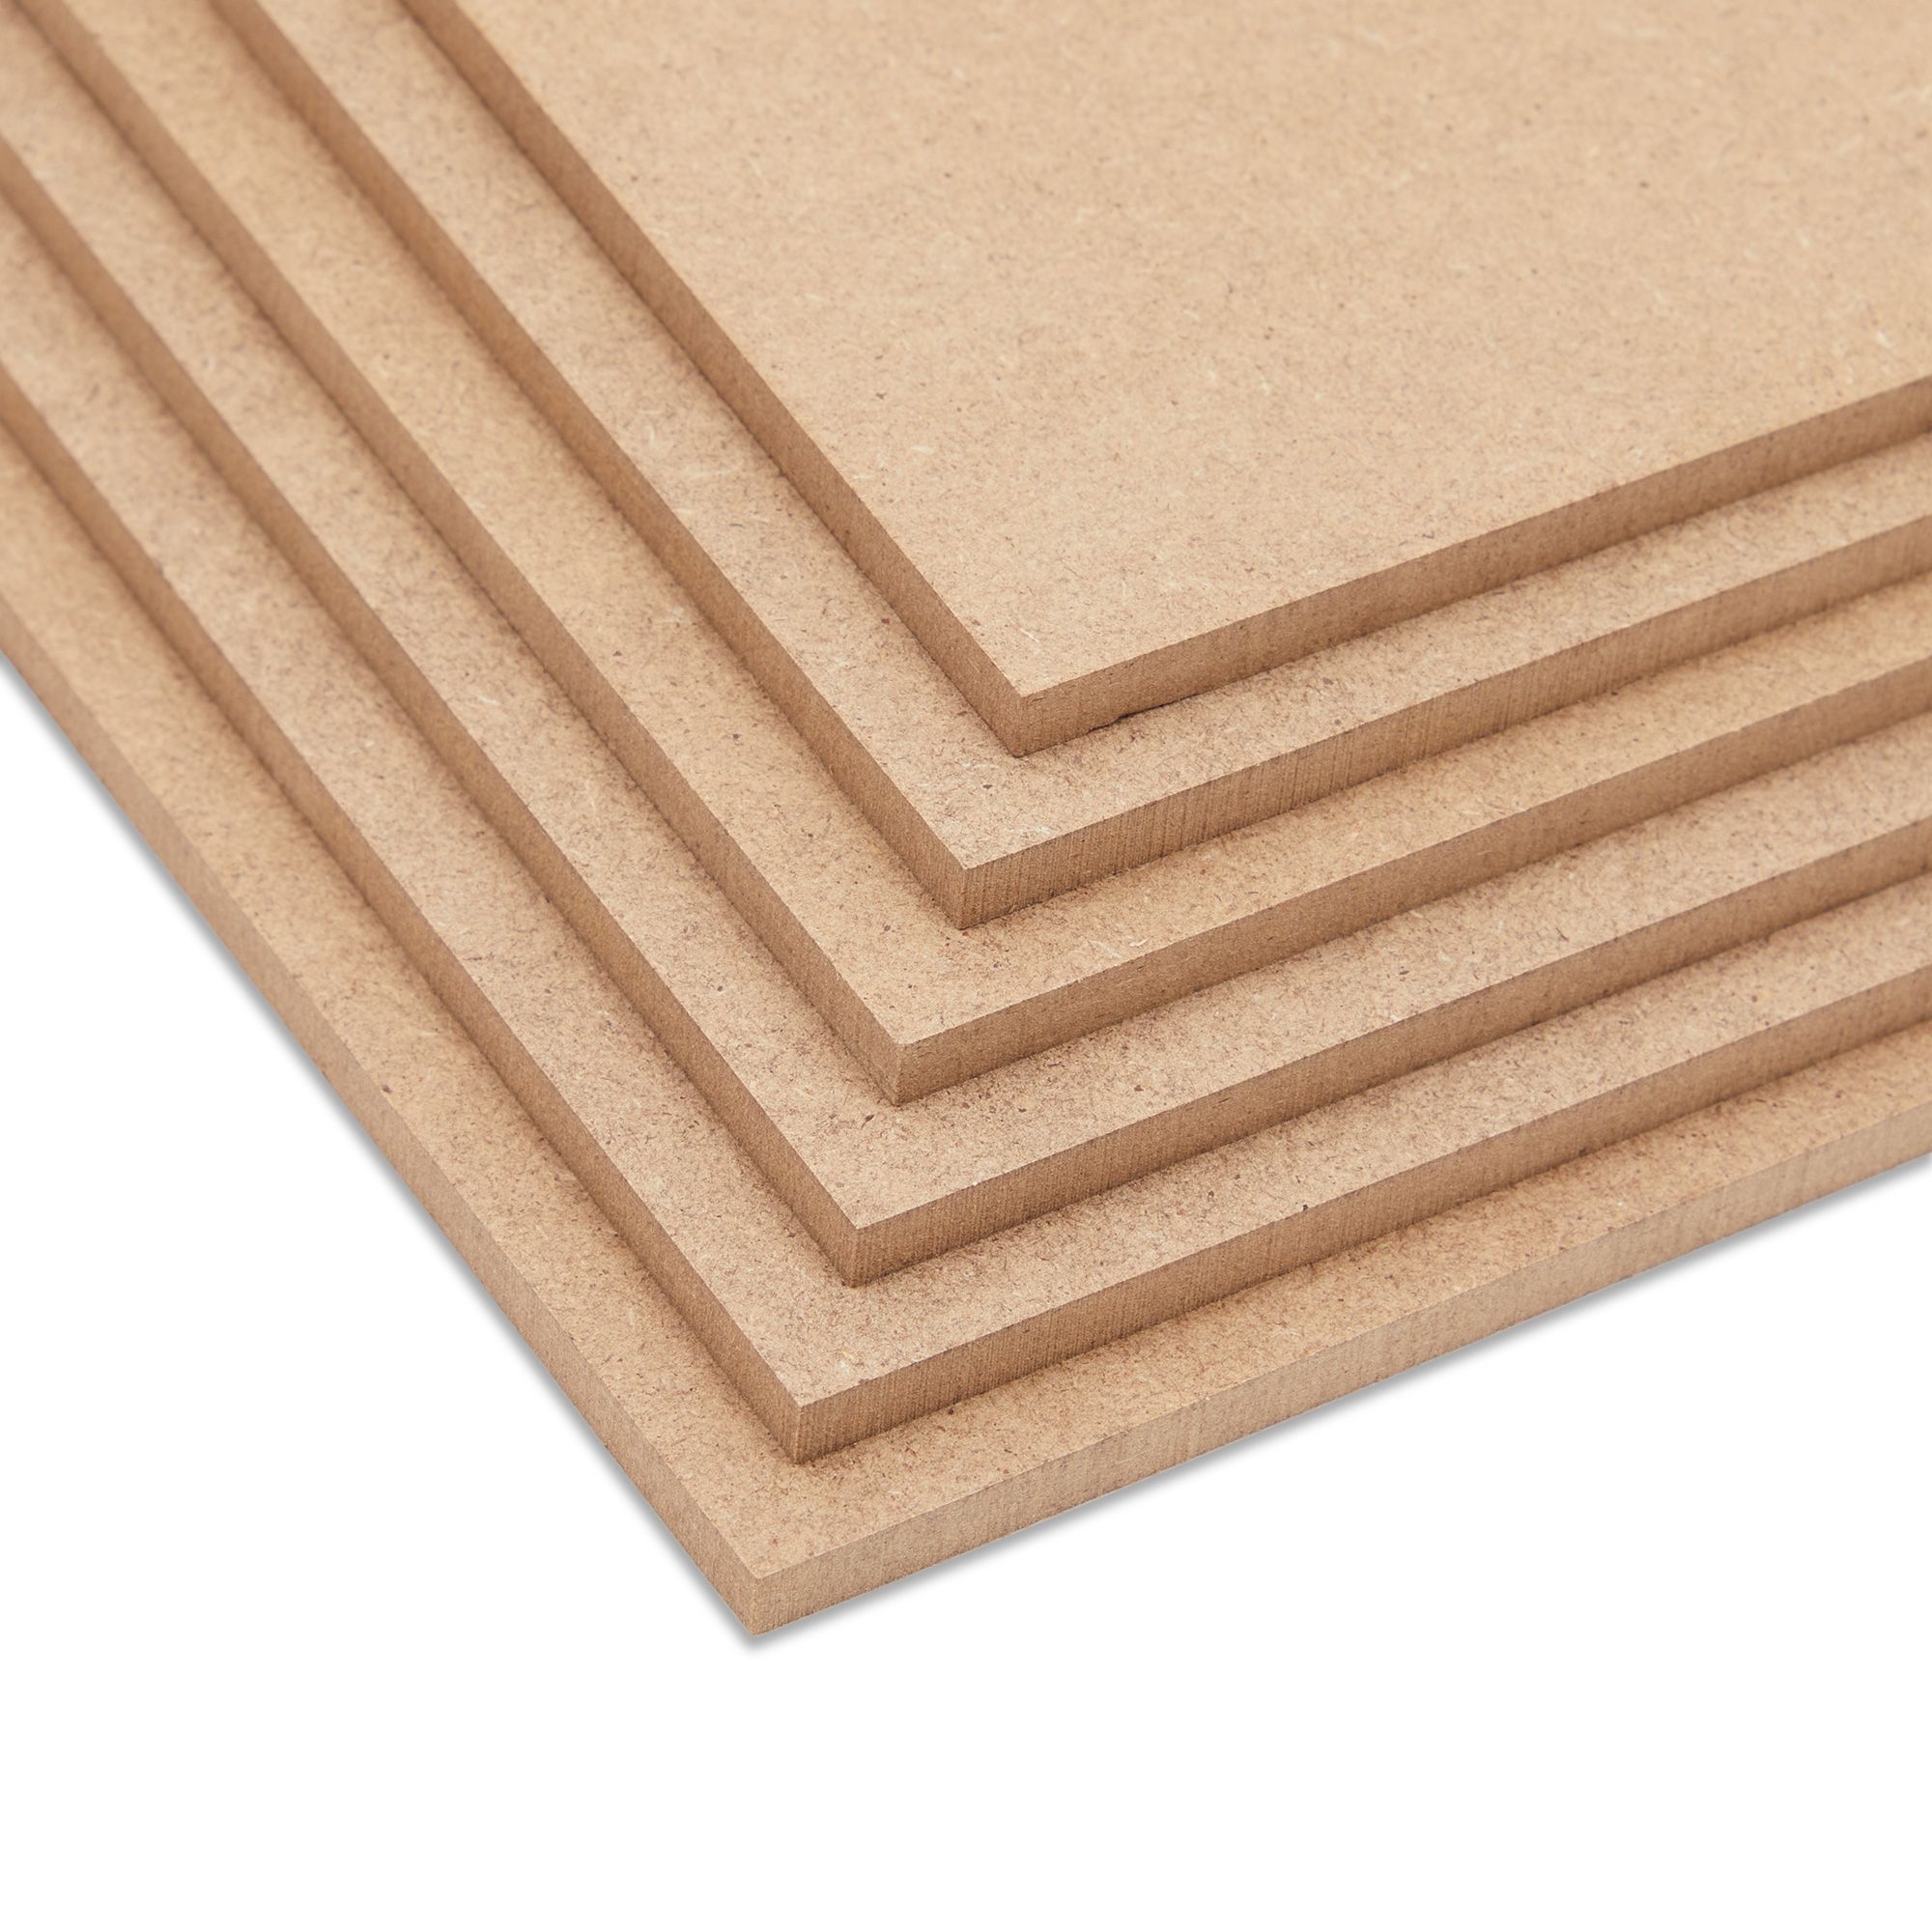 1/4 In MDF Wood Chipboard Sheets for Crafts, Engraving, Painting (11x14 in,  6 Pack)